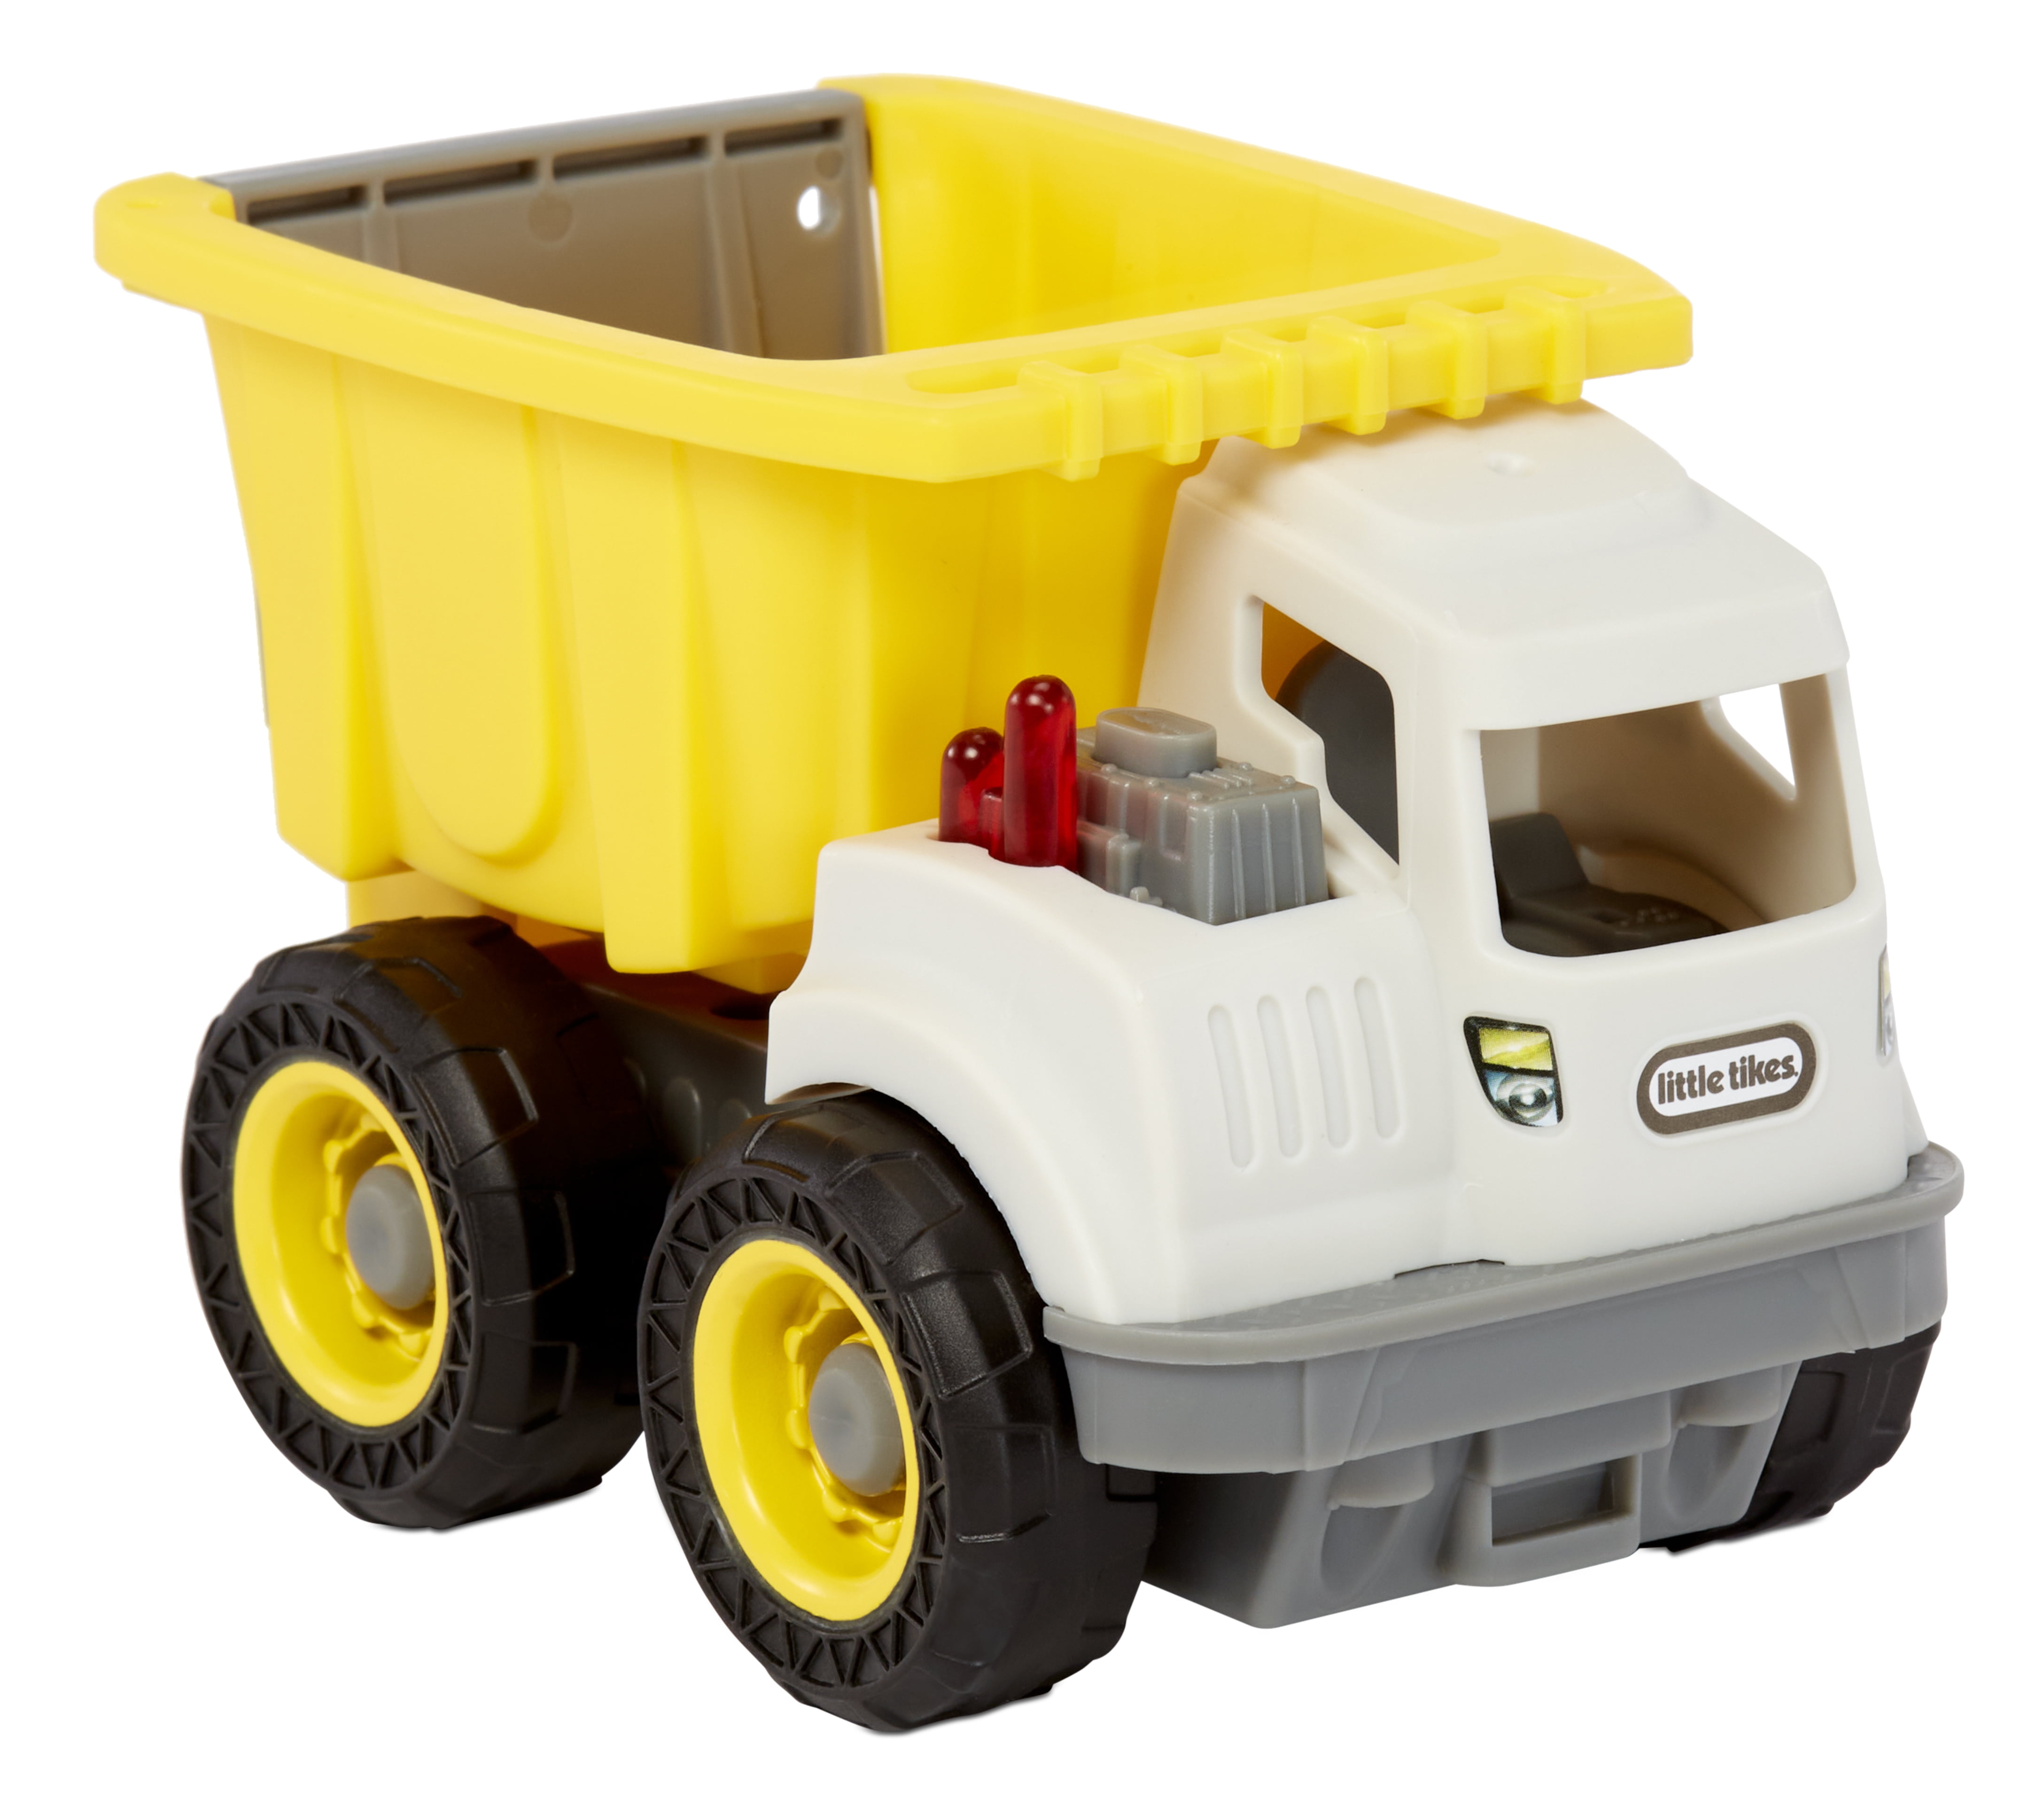 Little Tikes Dirt Diggers Mini Dump Truck Indoor Outdoor Multicolor Toy Car and Toy Vehicles for On the Go Play for Kids 2+